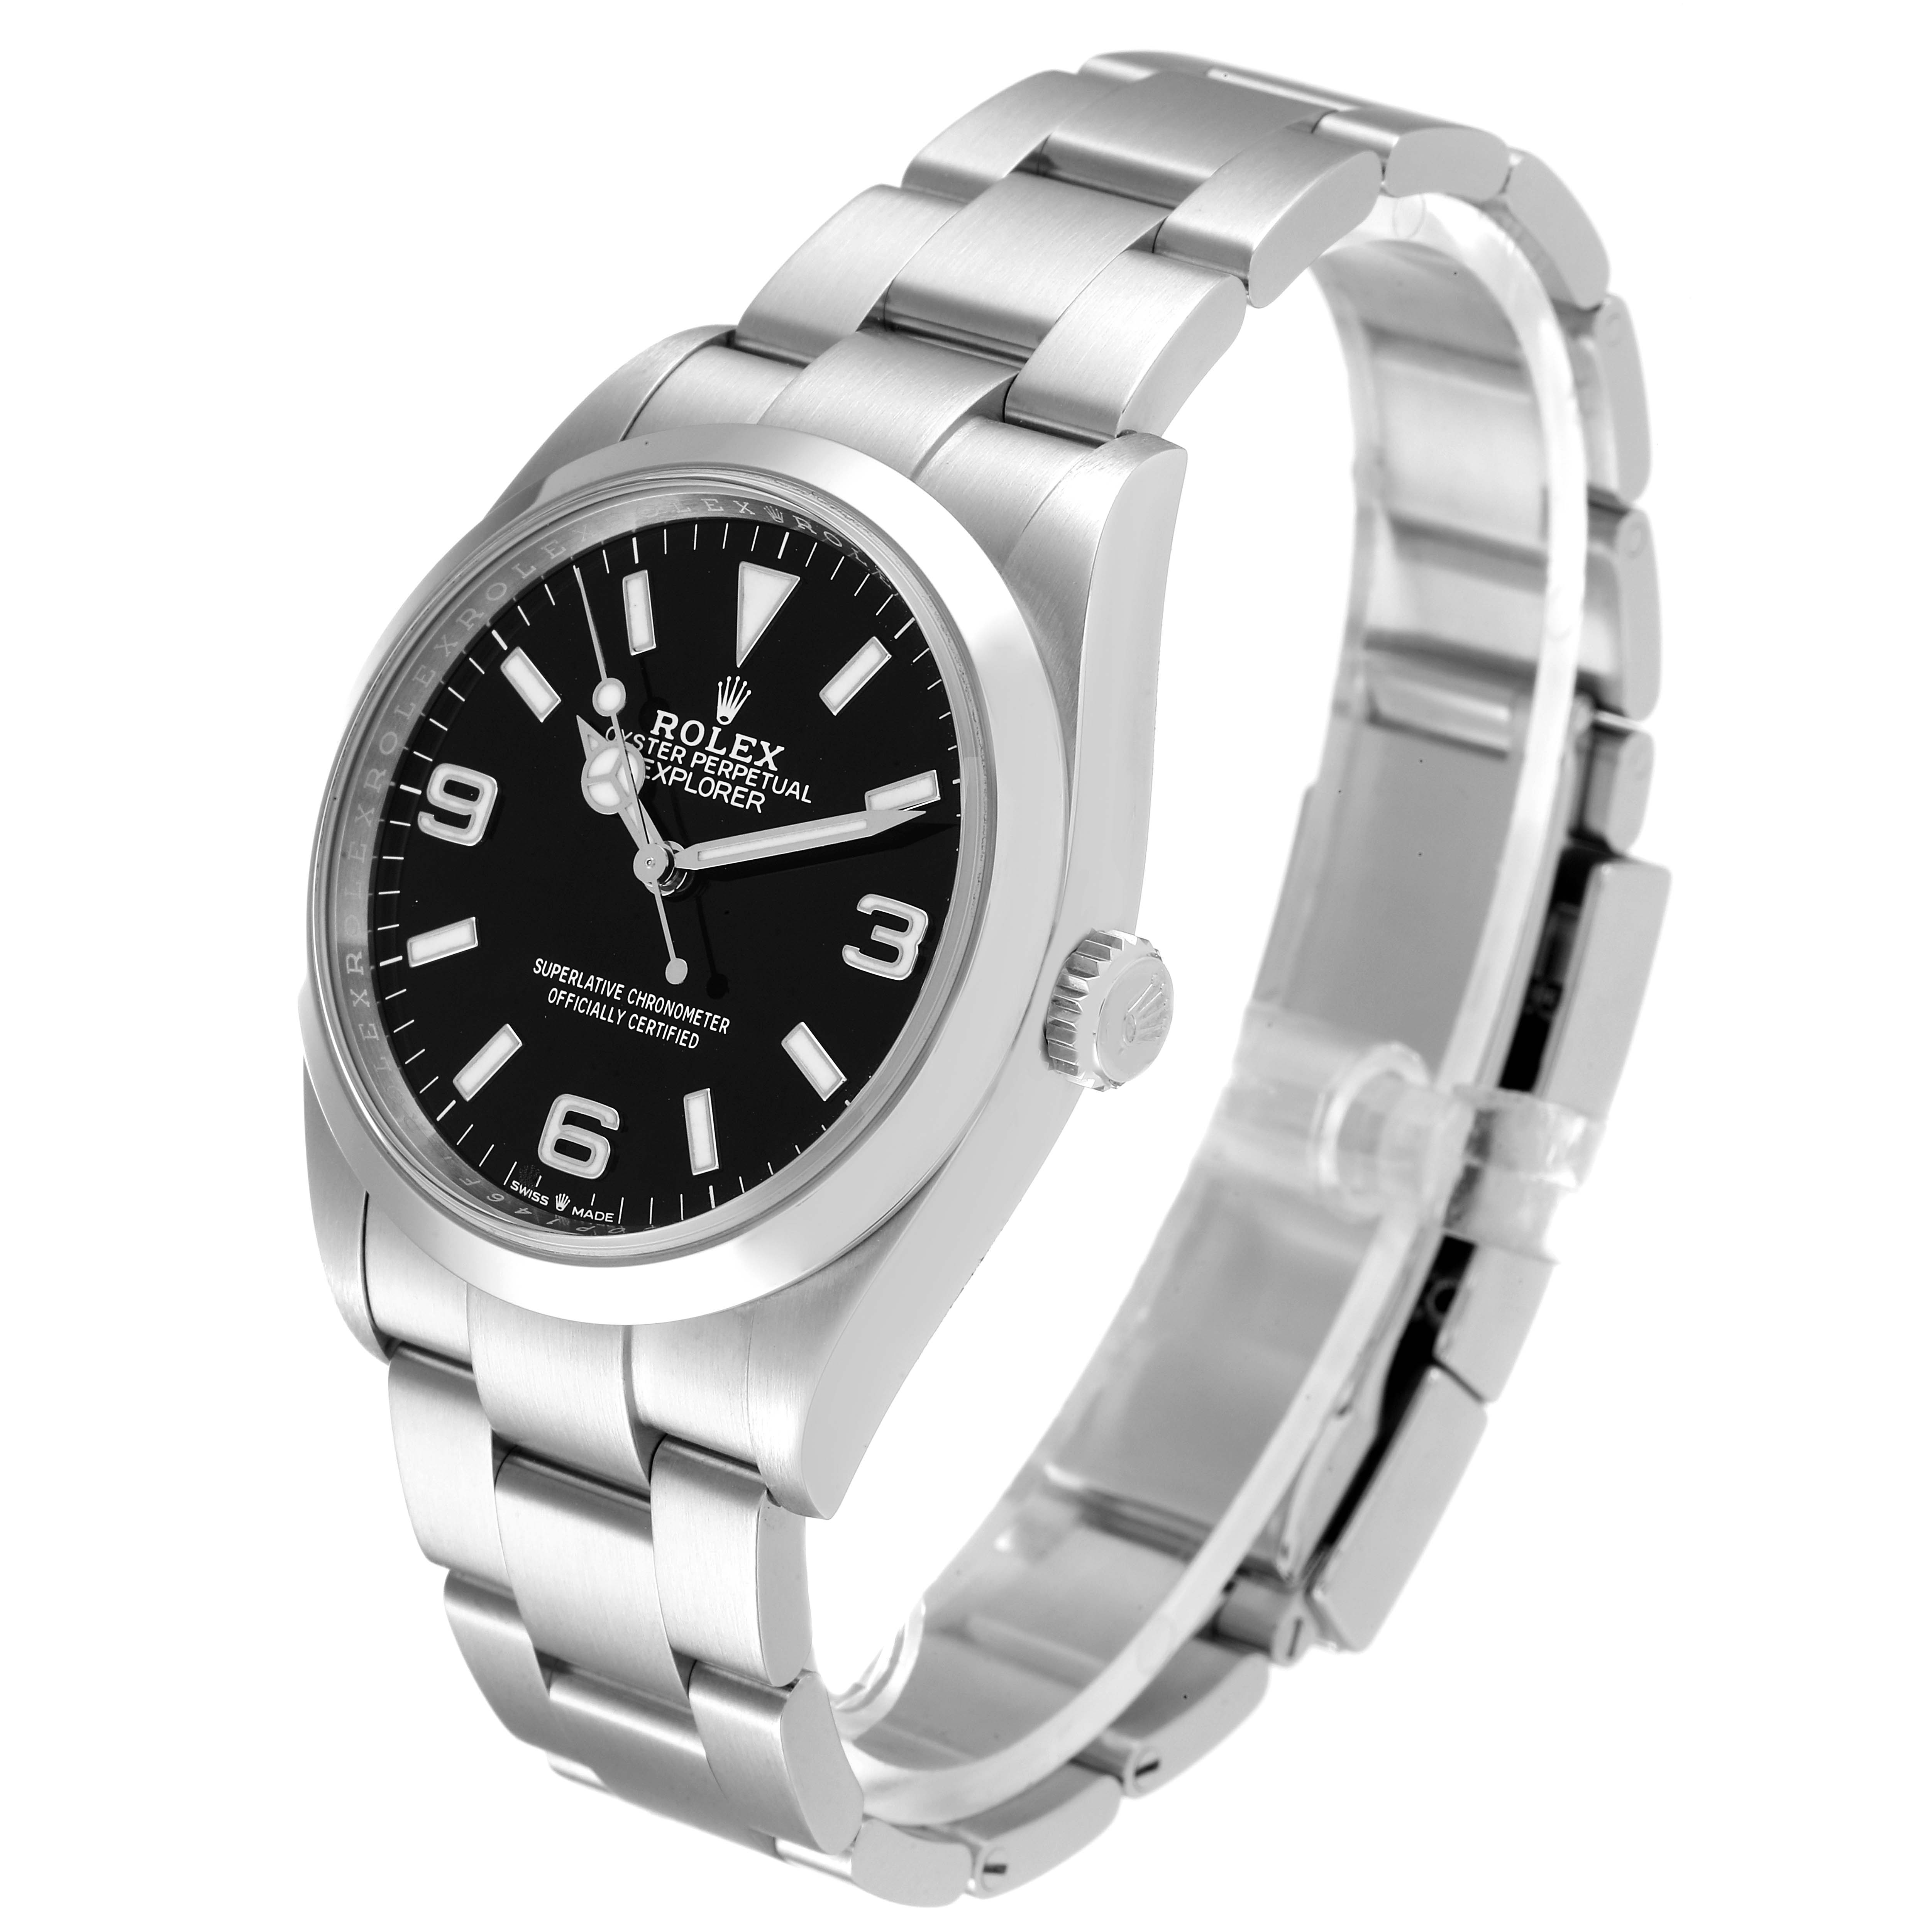 Rolex Explorer I Black Dial Stainless Steel Mens Watch 124270 Box Card ...